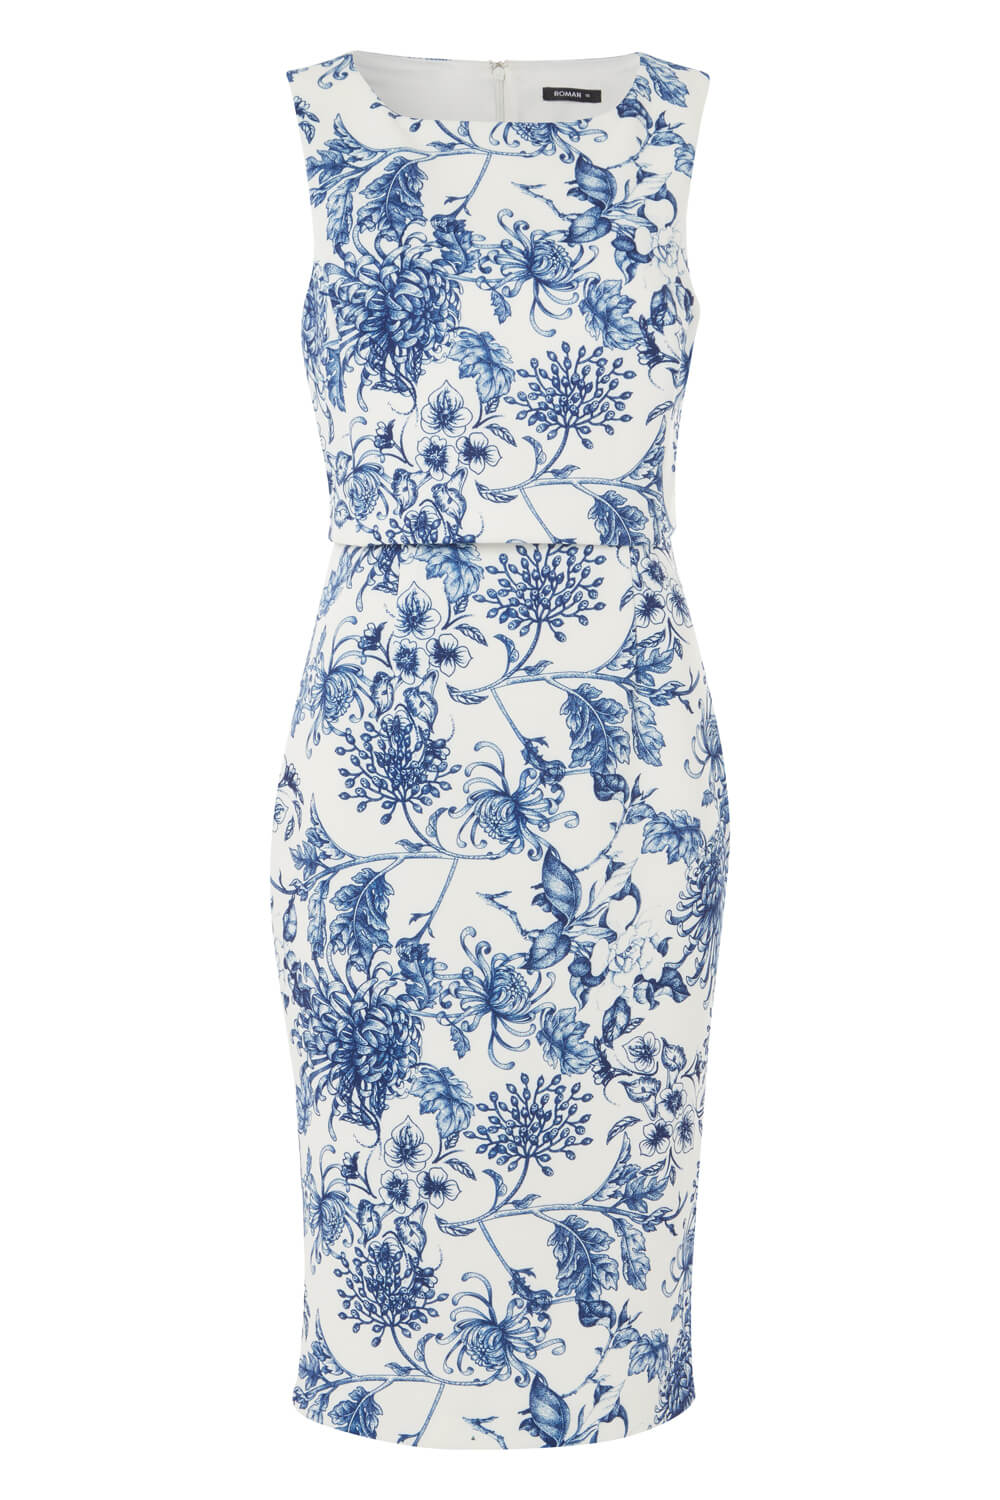 Ivory  Floral Double Layer Scuba Dress, Image 5 of 5